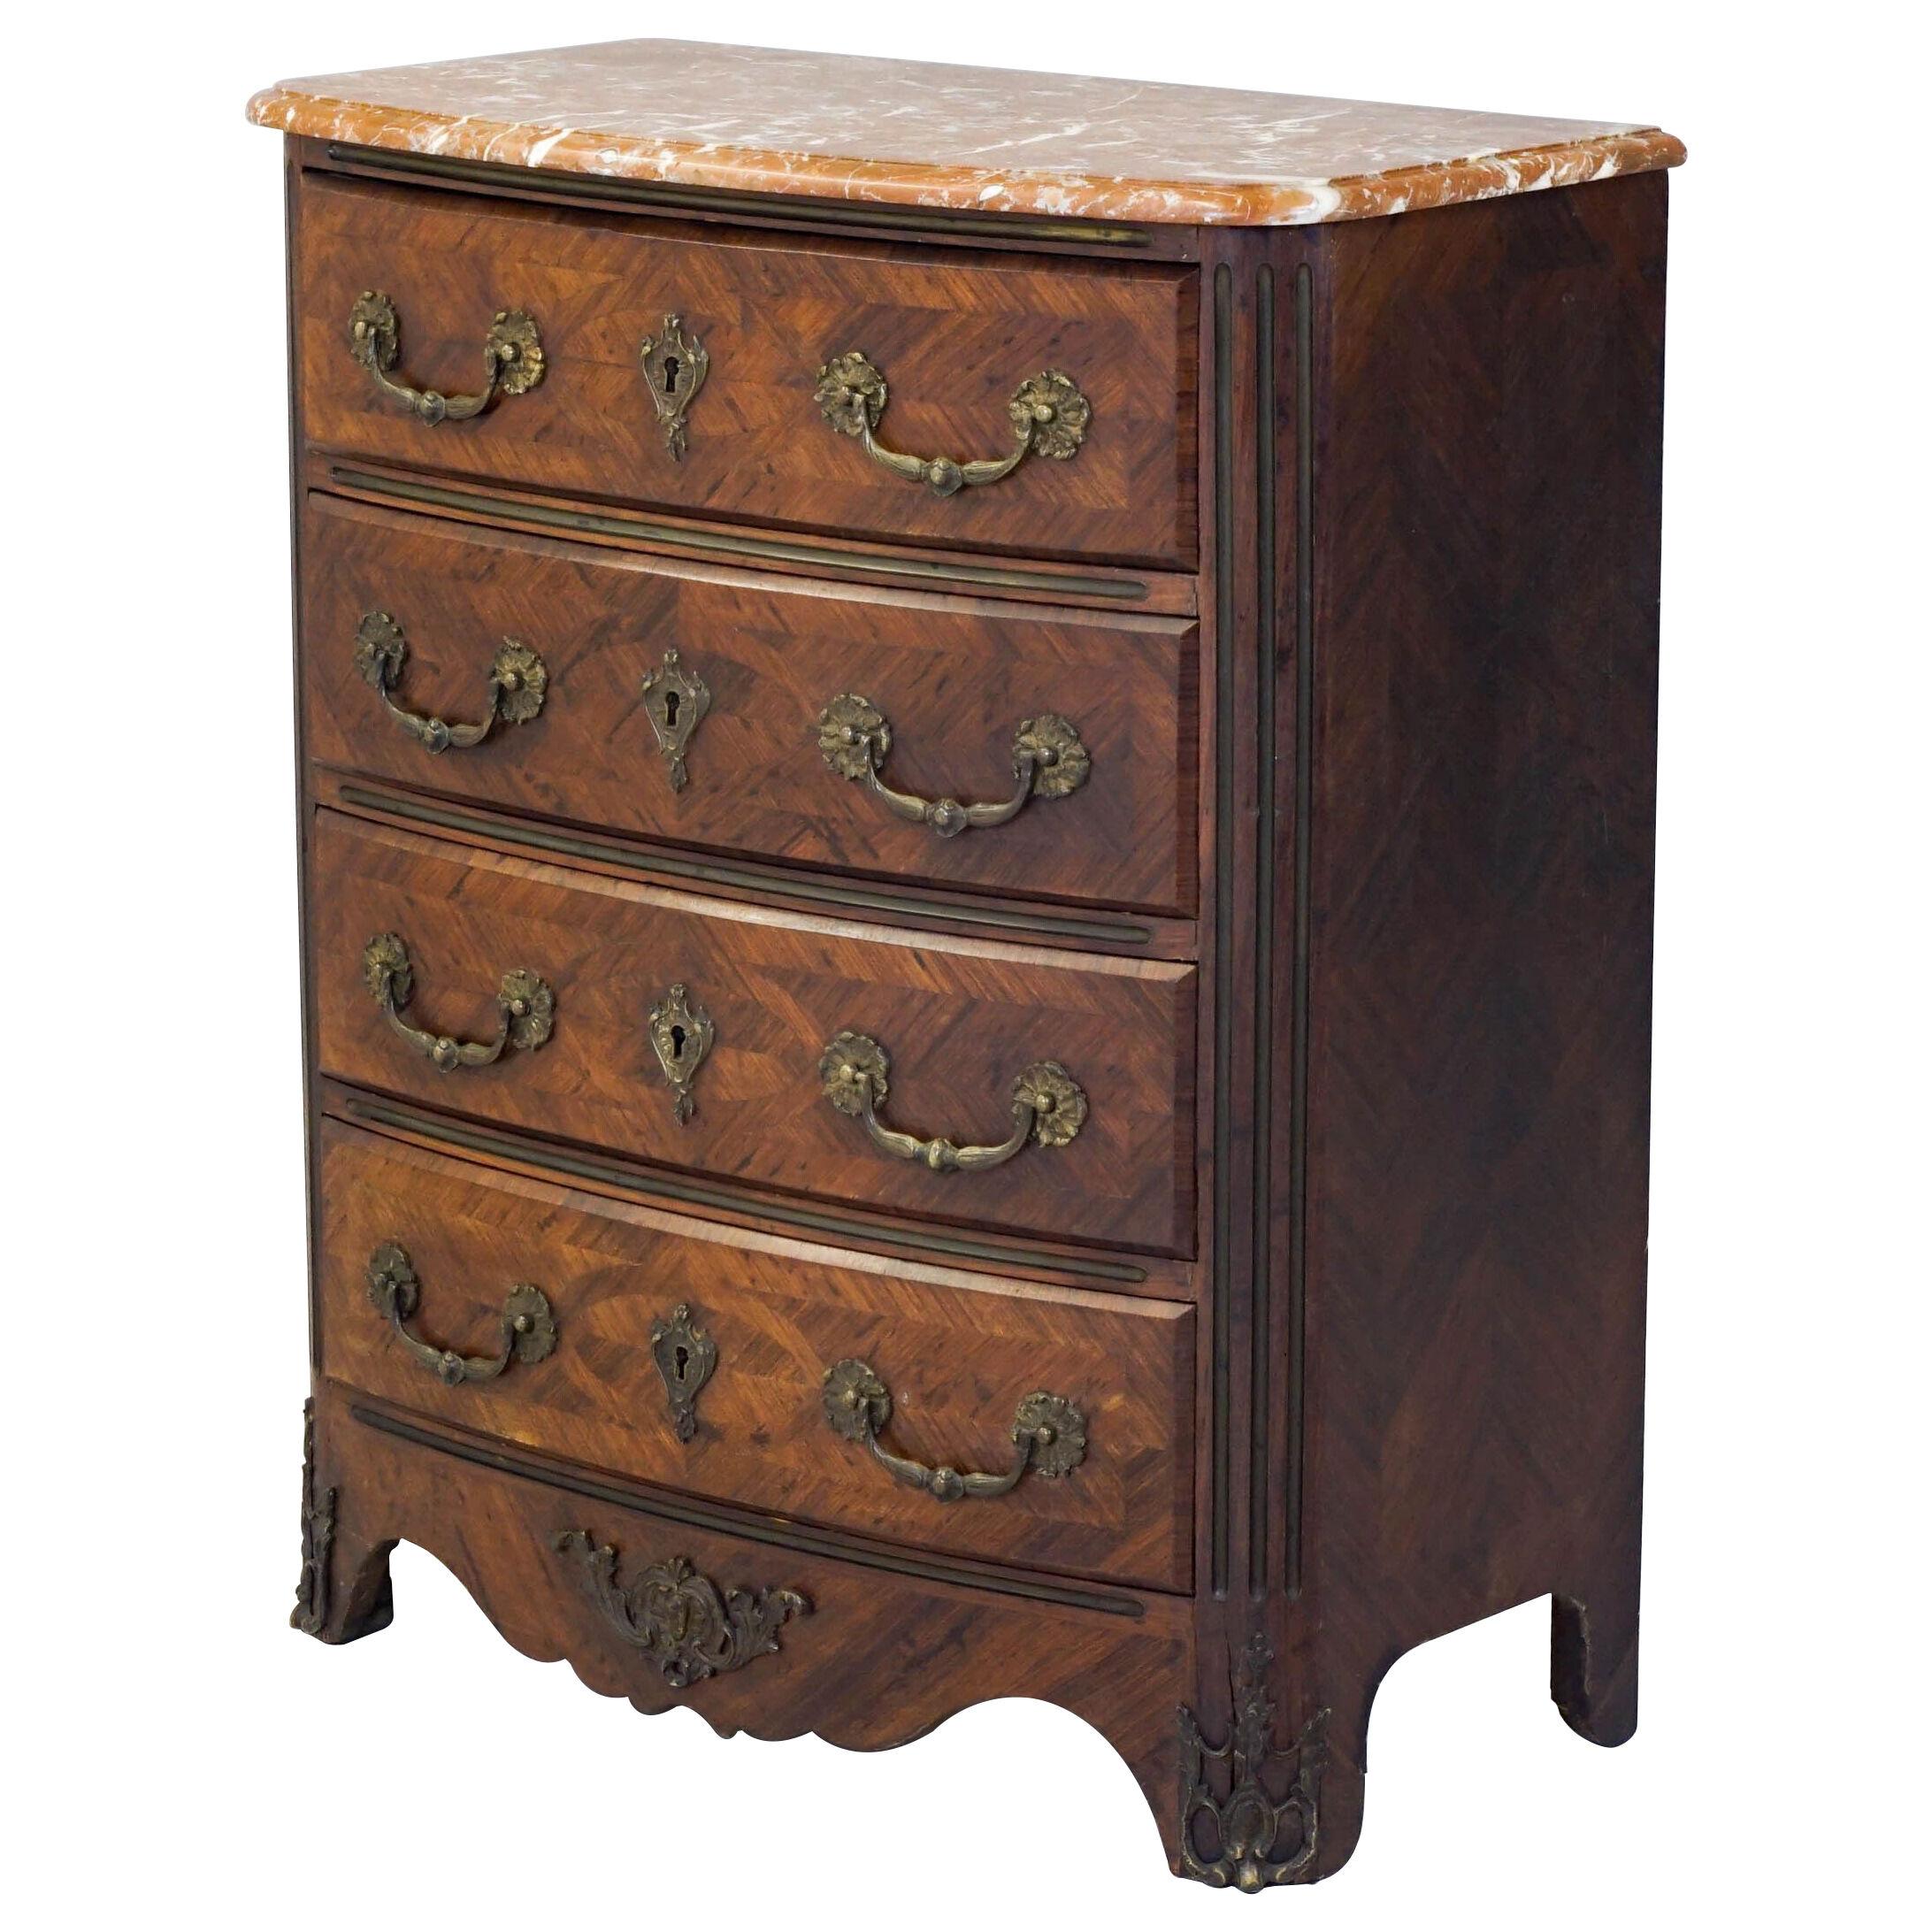 Small French Commode